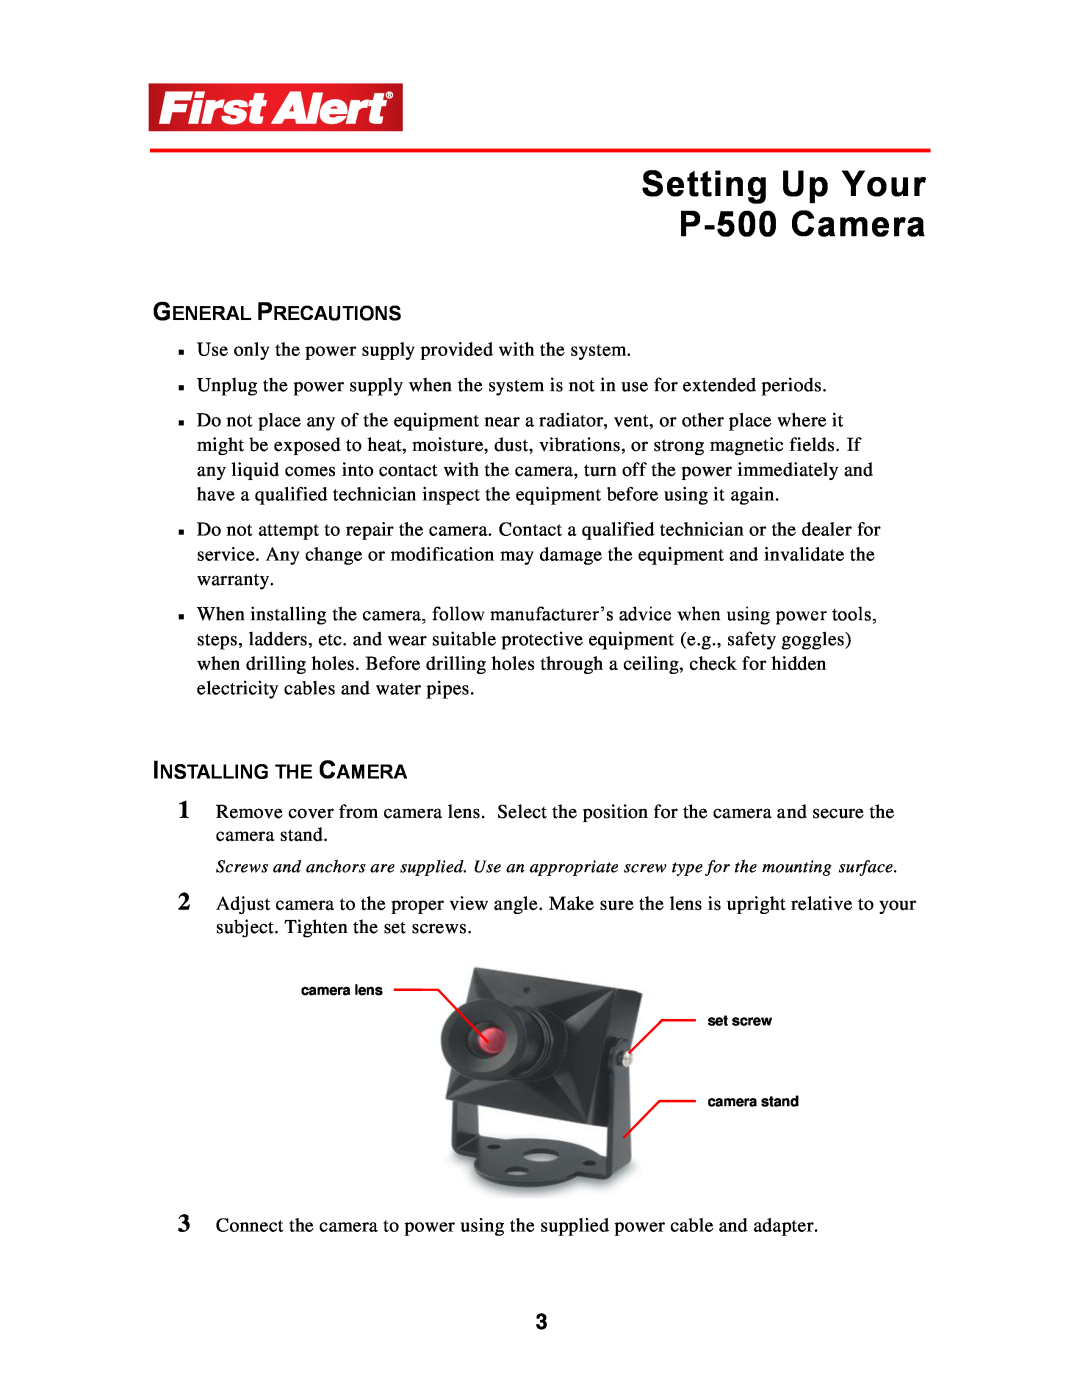 First Alert user manual Setting Up Your P-500Camera, General Precautions, Installing The Camera 